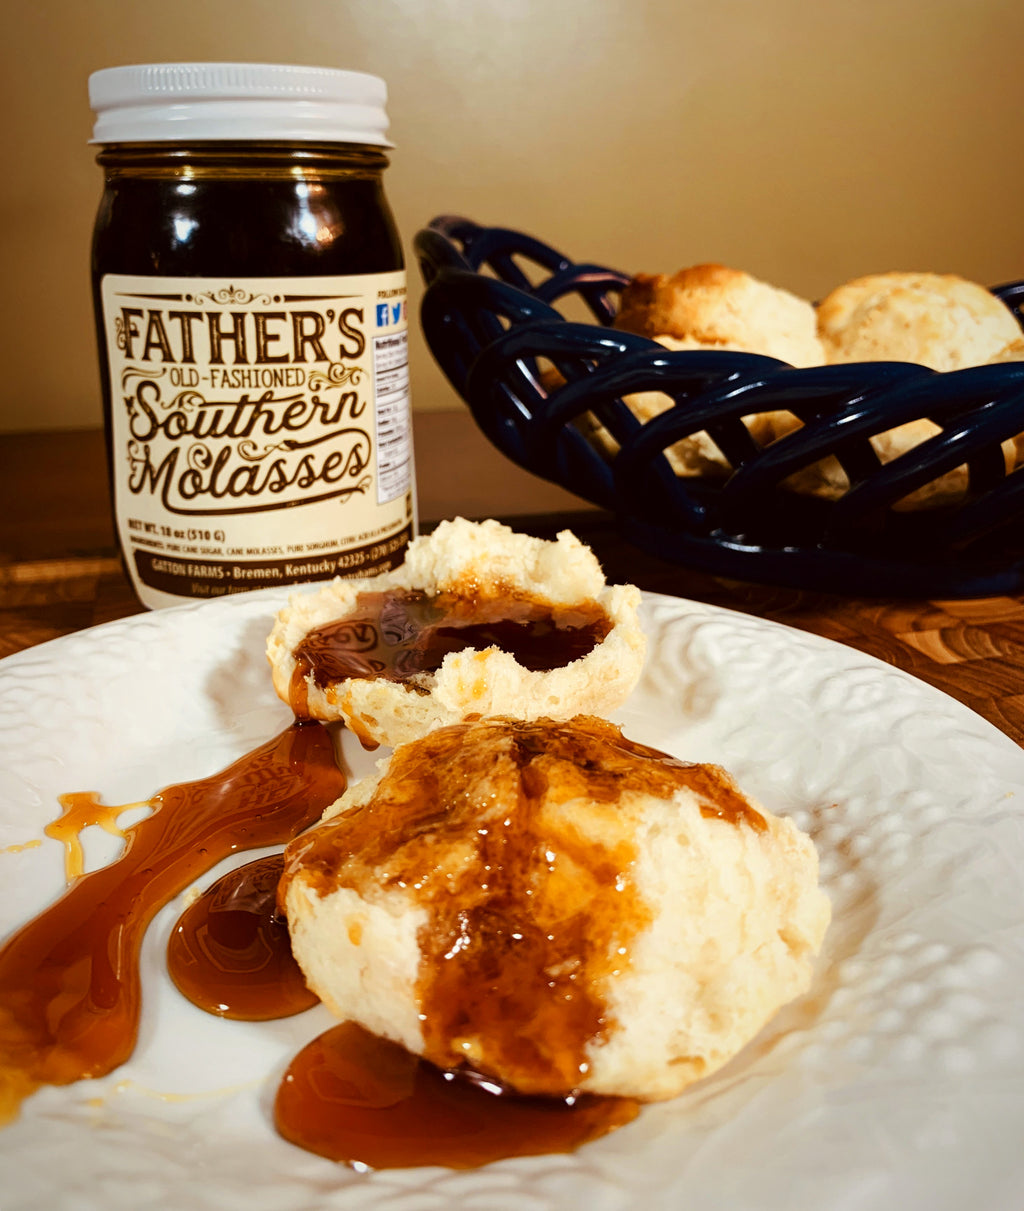 Old Fashioned Southern Molasses